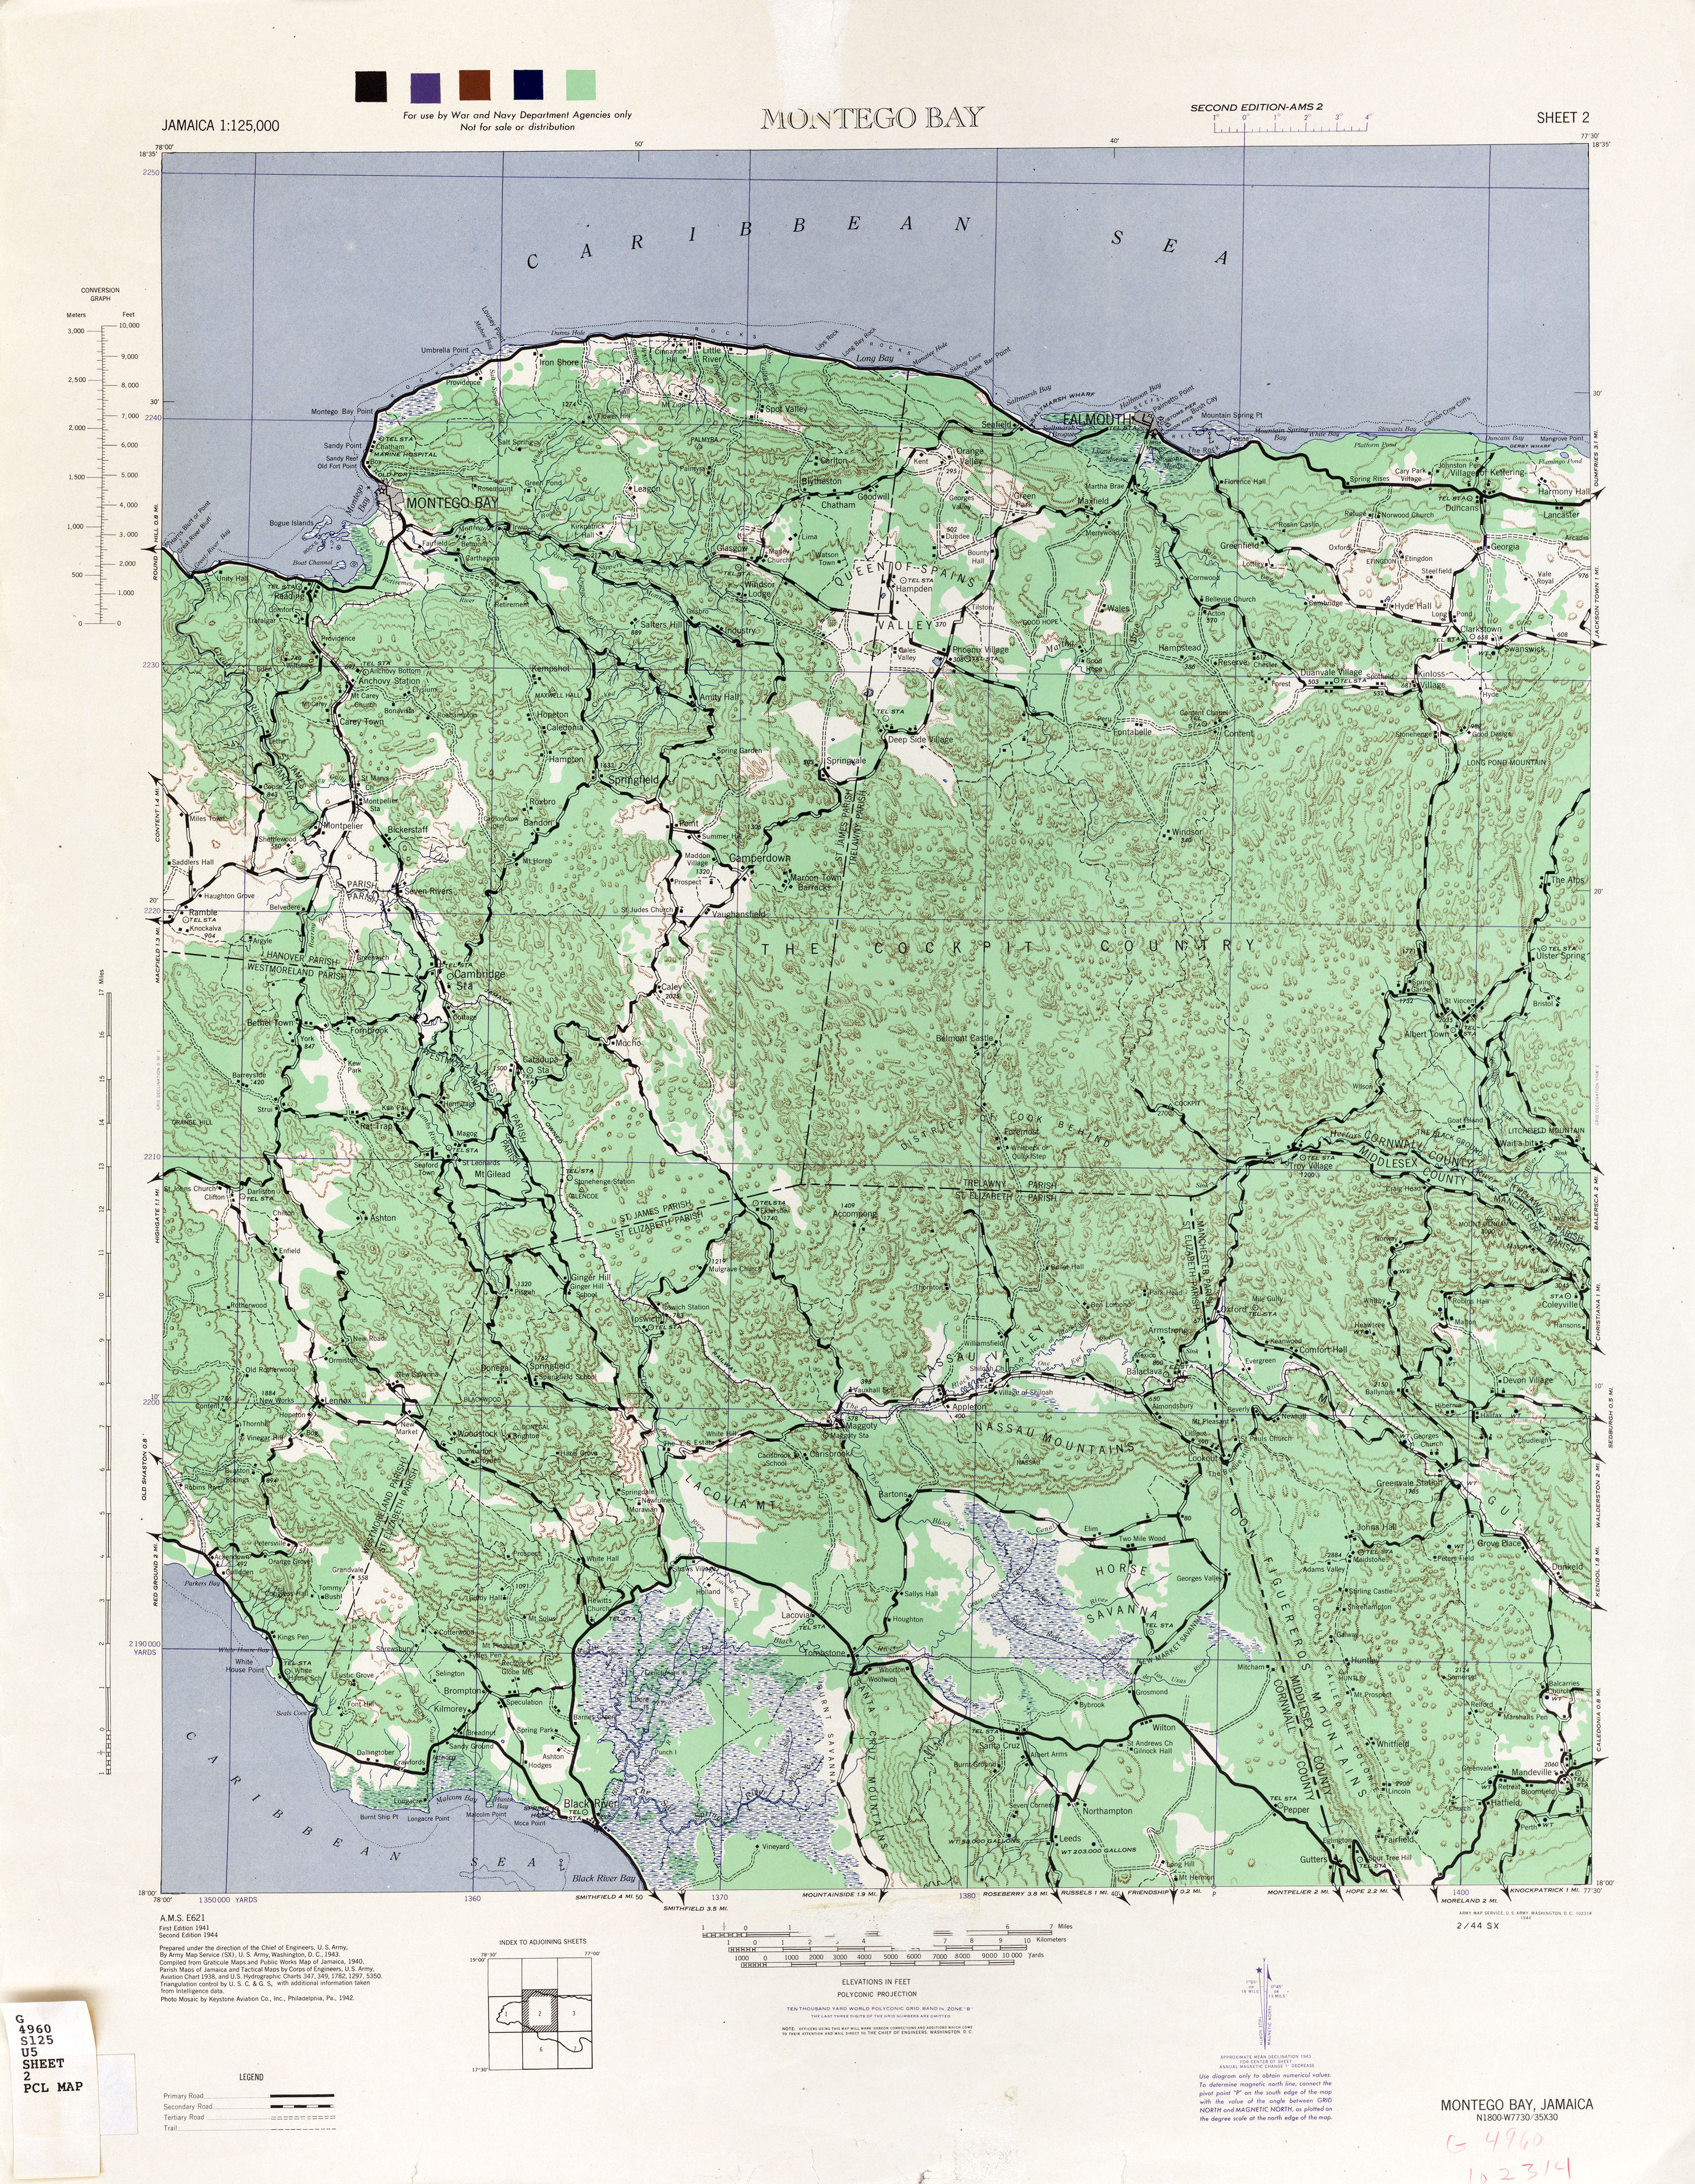 Jamaica AMS Topographic Maps - Perry-Castañeda Map Collection - UT Library Online2970 x 3826